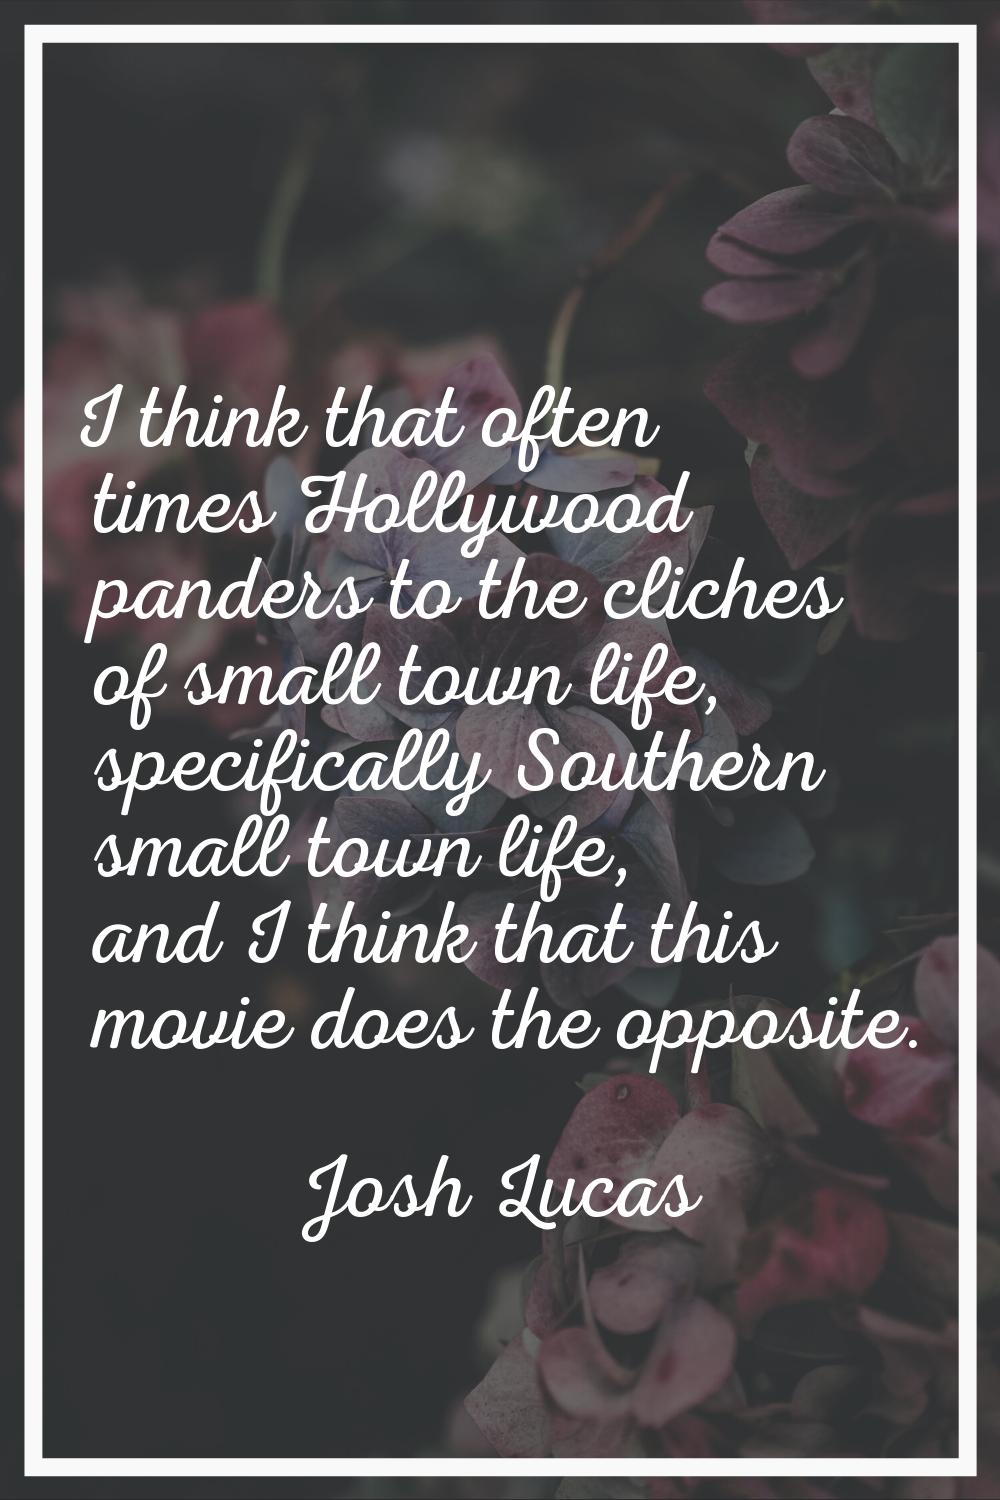 I think that often times Hollywood panders to the cliches of small town life, specifically Southern